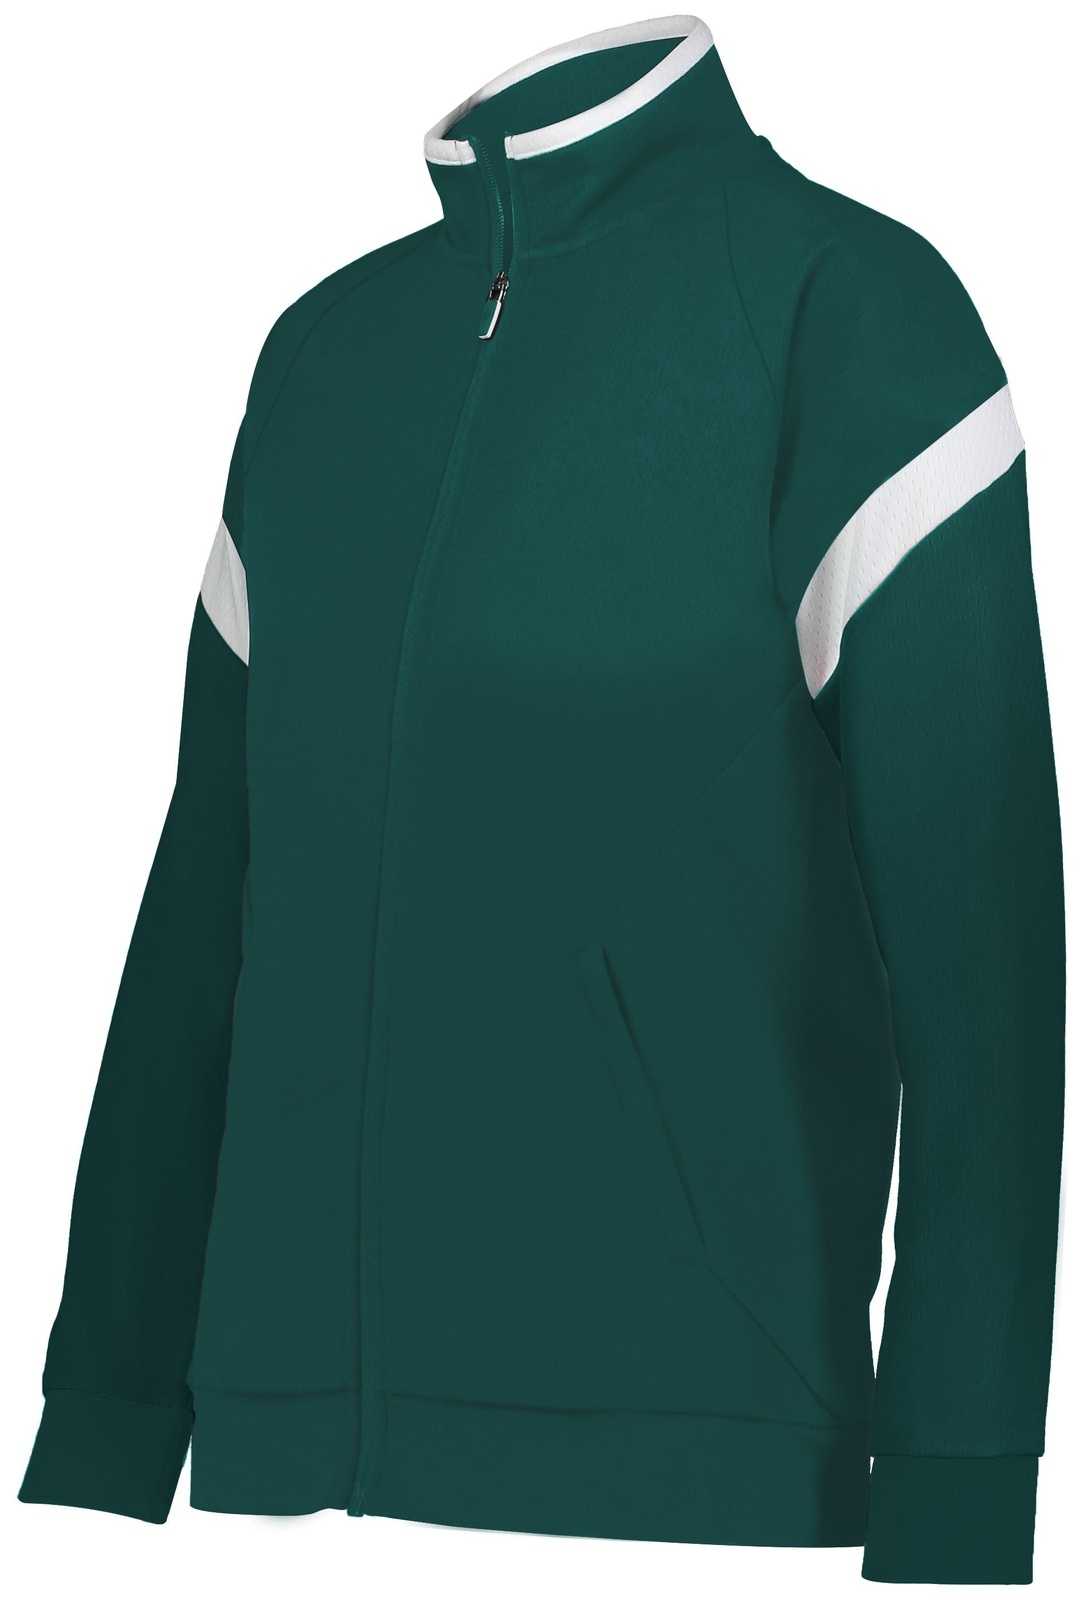 Holloway 229779 Ladies Limitless Jacket - Dark Green White - HIT a Double